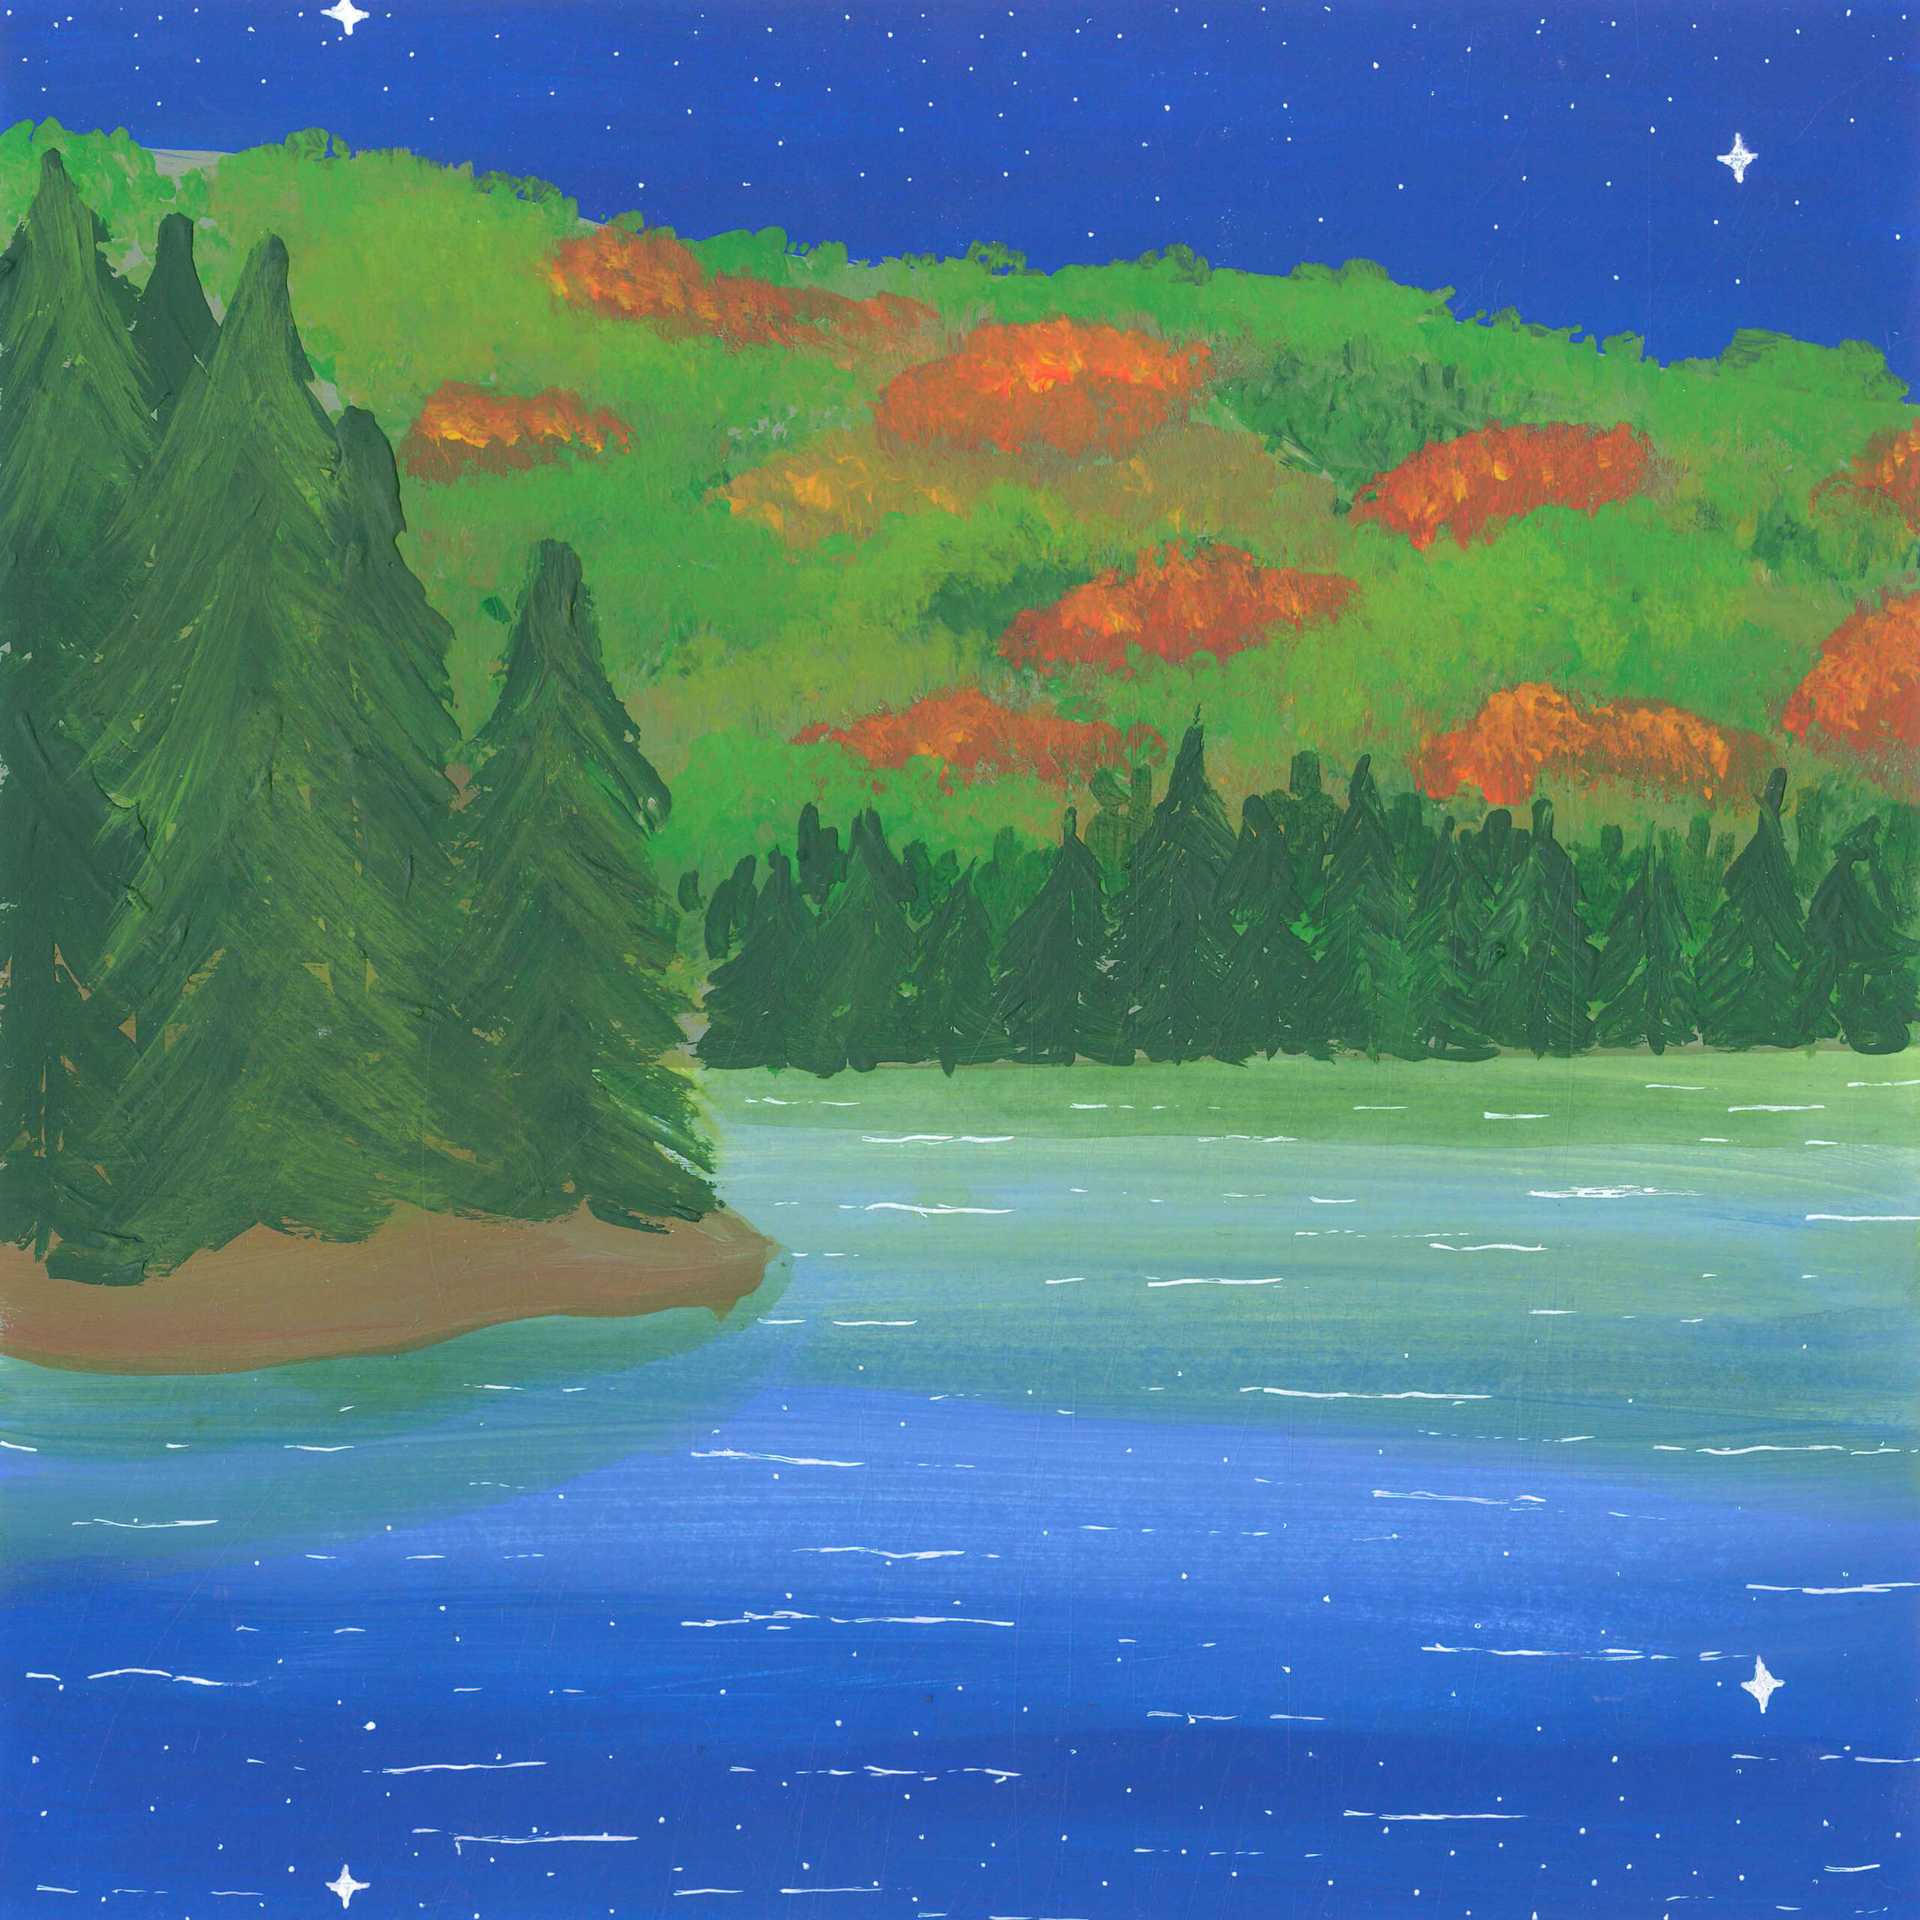 Beaver and Loons on a Lake – End of Summer Night - nature landscape painting - earth.fm